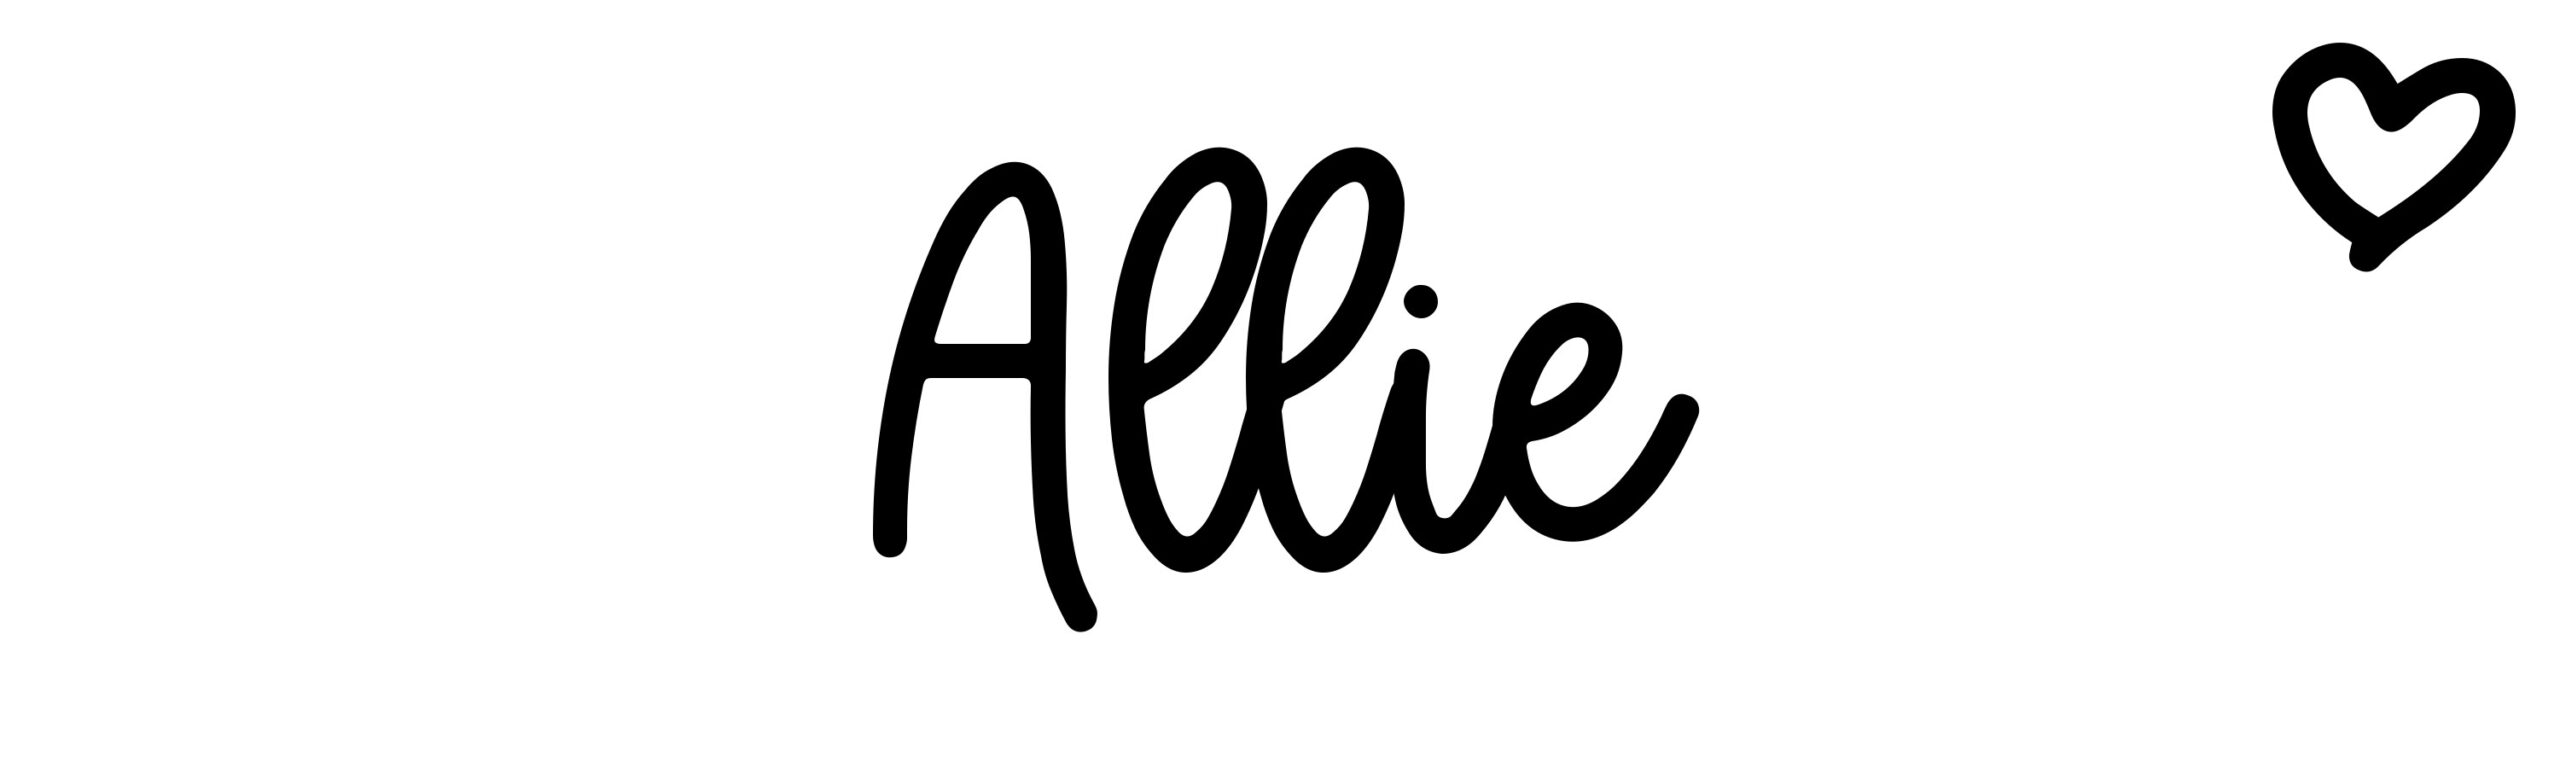 Allie - Name meaning, origin, variations and more